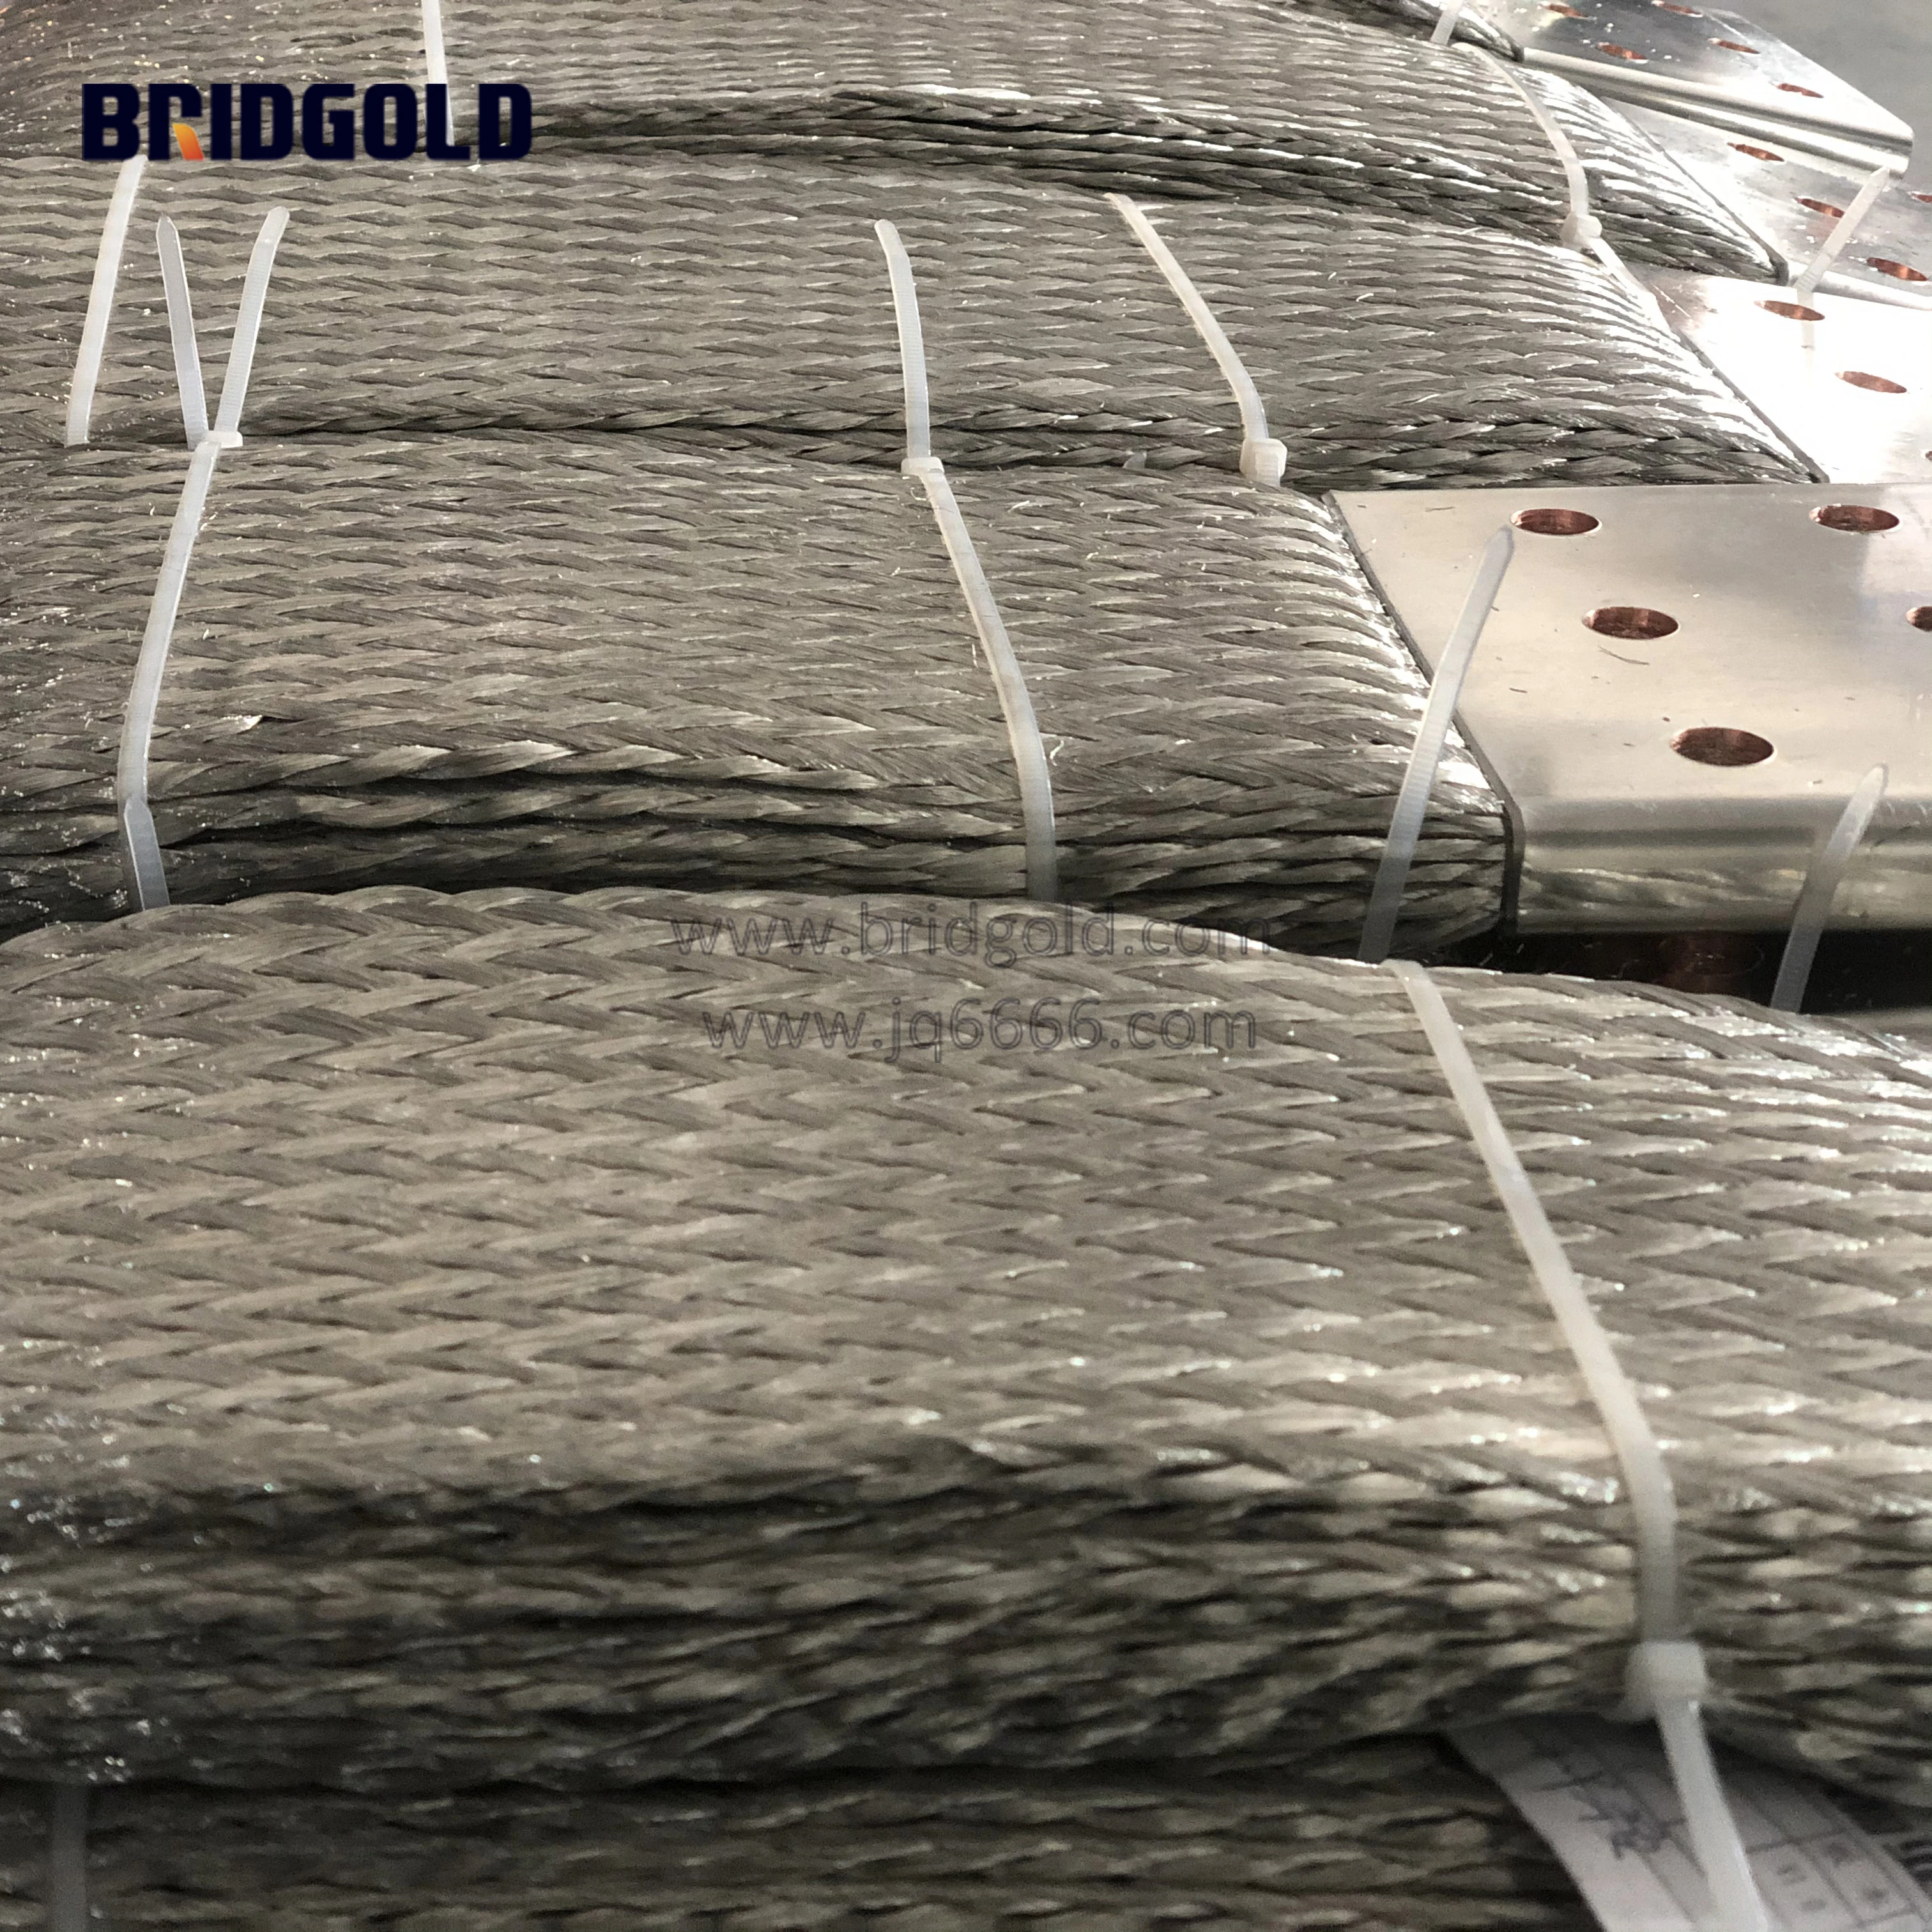 China factory C11000 braided copper wire 48 x 30/0.15 flat braided copper wire 25mm2 copper braid